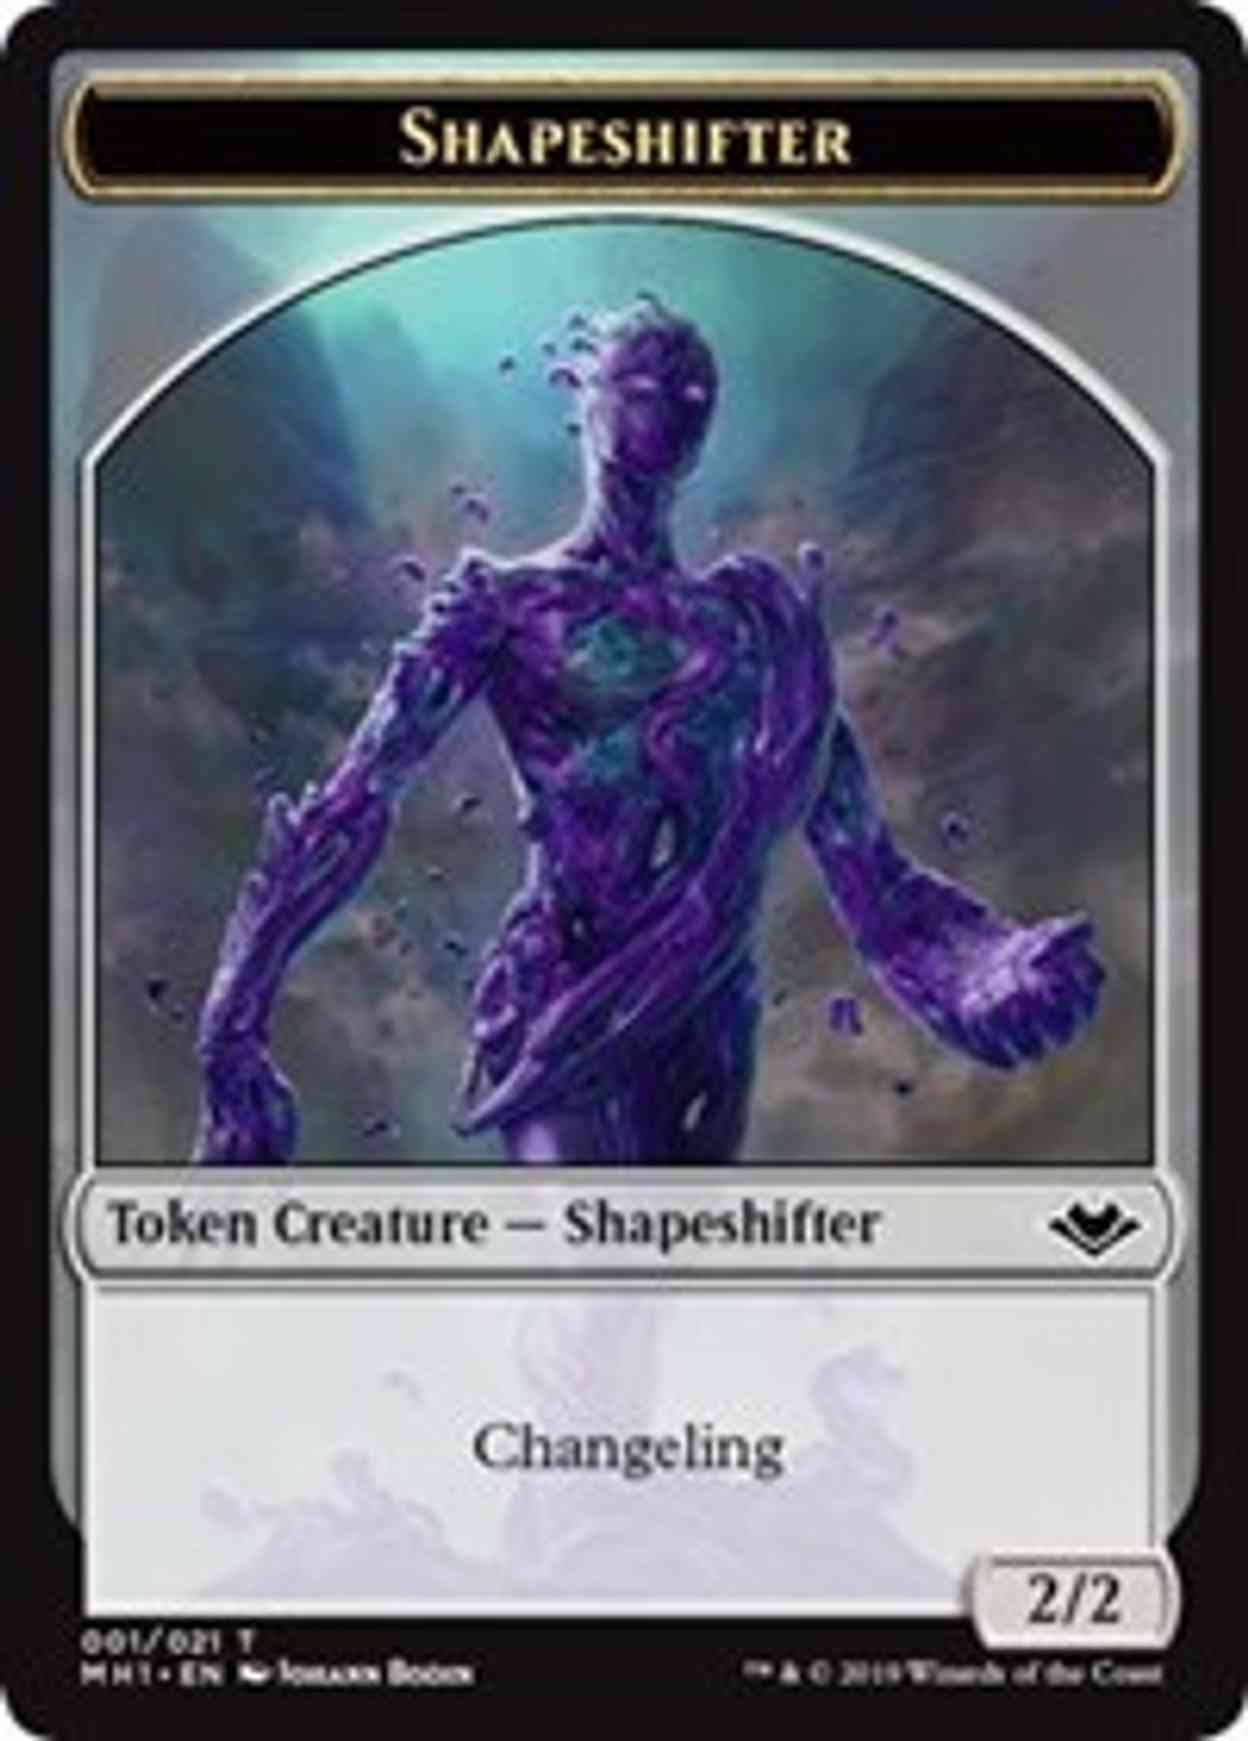 Shapeshifter (001) // Construct (017) Double-sided Token magic card front